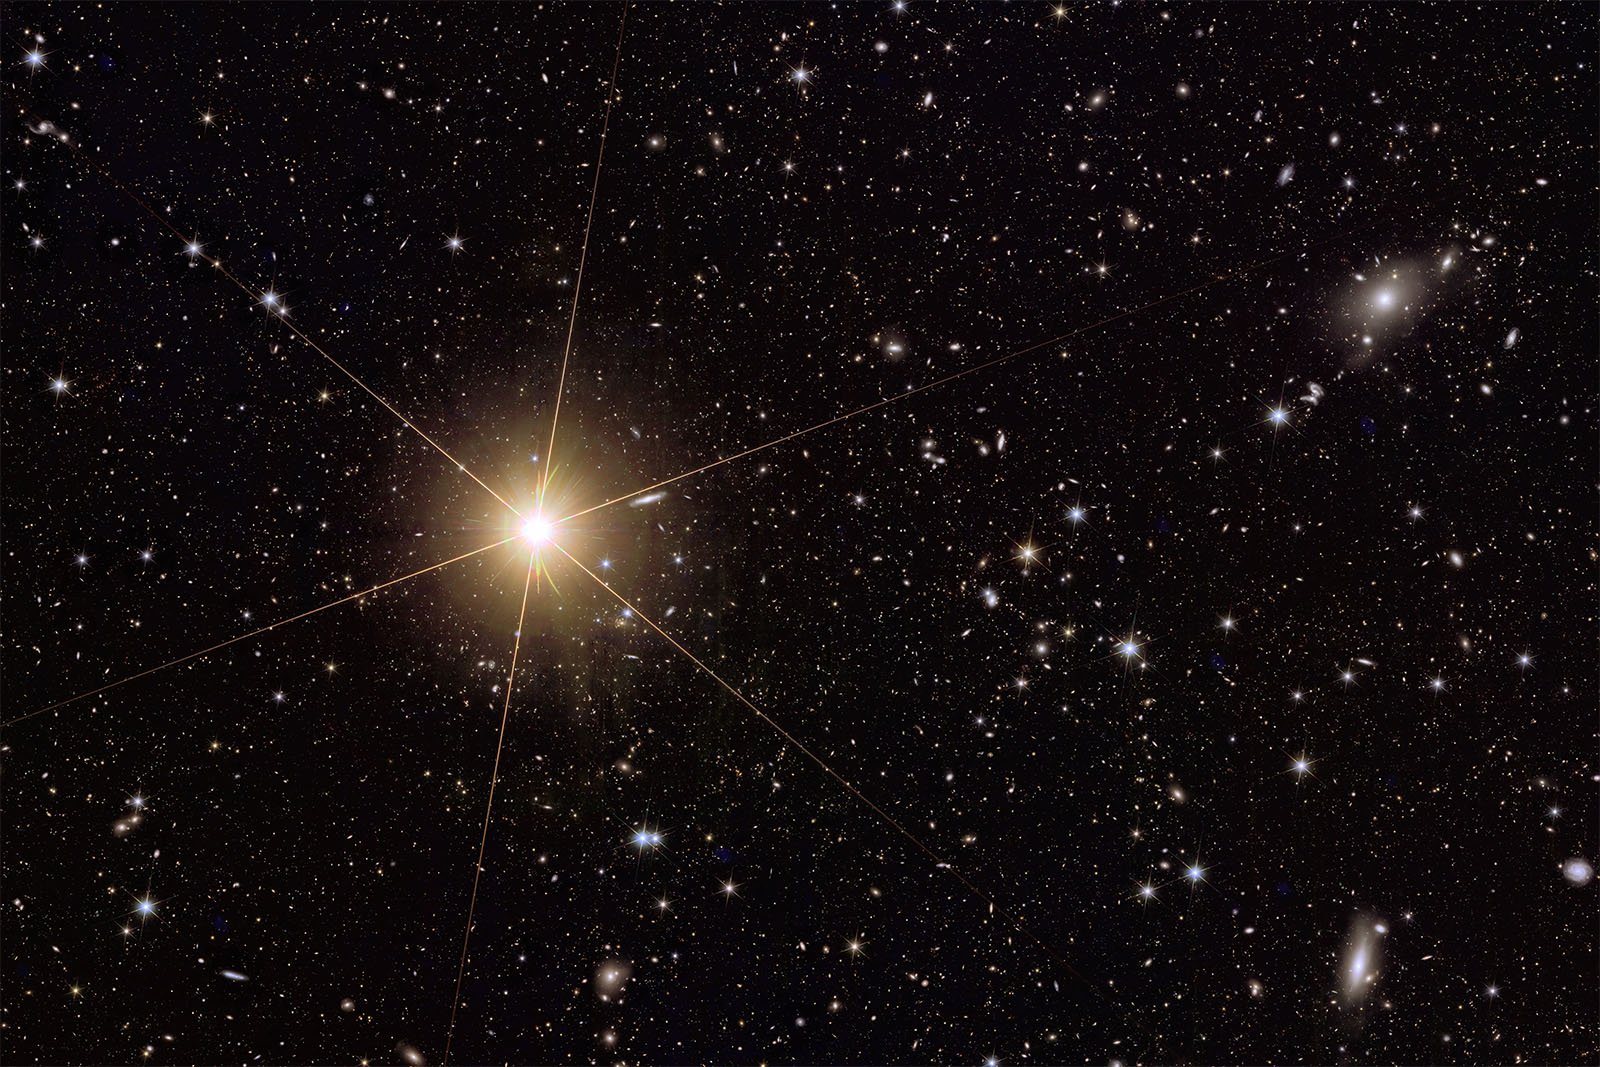 A bright yellow star shines in the center of a densely populated star field. The star emits prominent diffraction spikes, creating a cross-like pattern. Numerous other stars and galaxies of varying sizes and brightness are scattered across the dark backdrop of space.